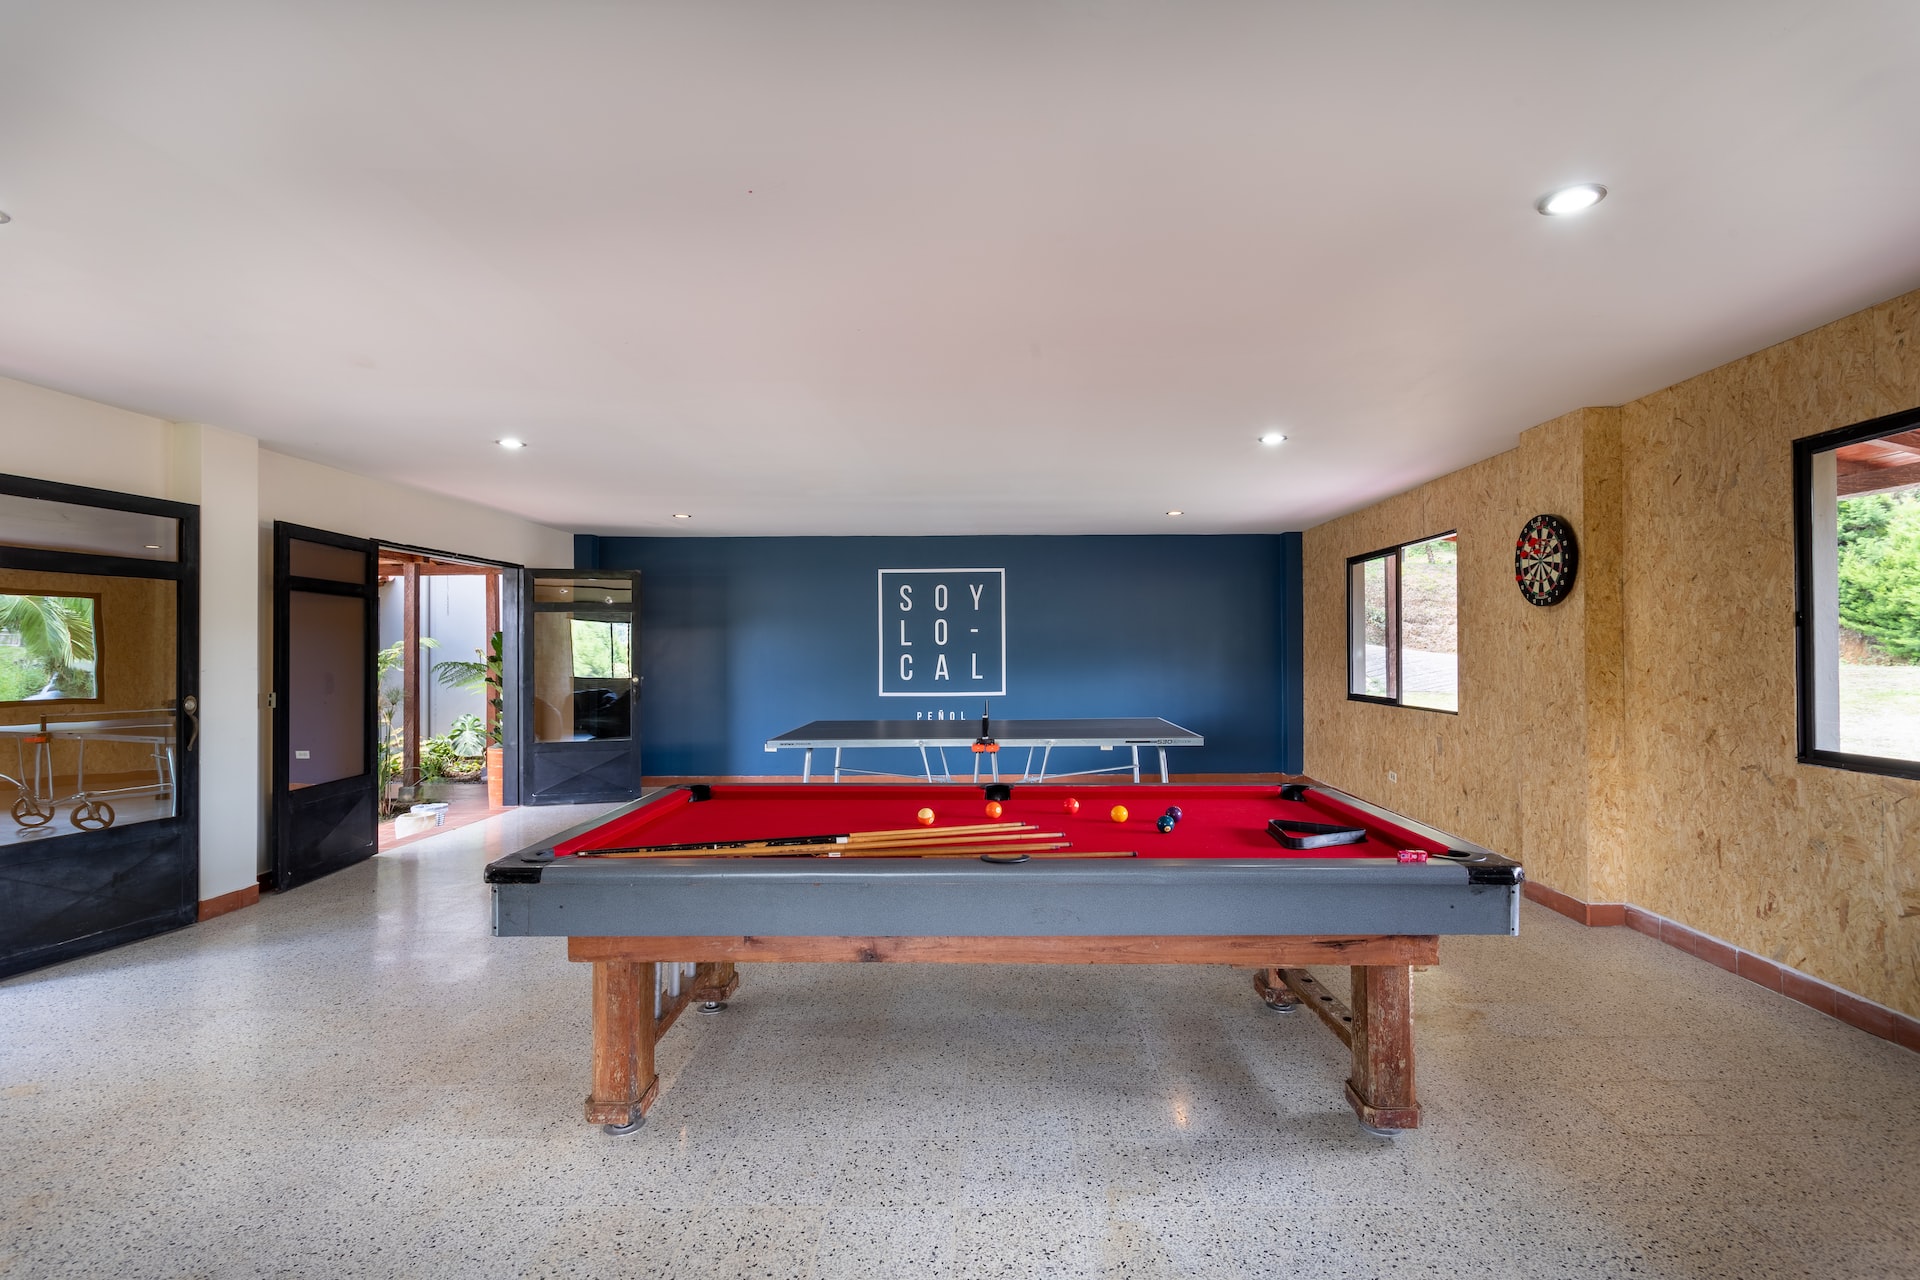 Best Pool Table Under 1500